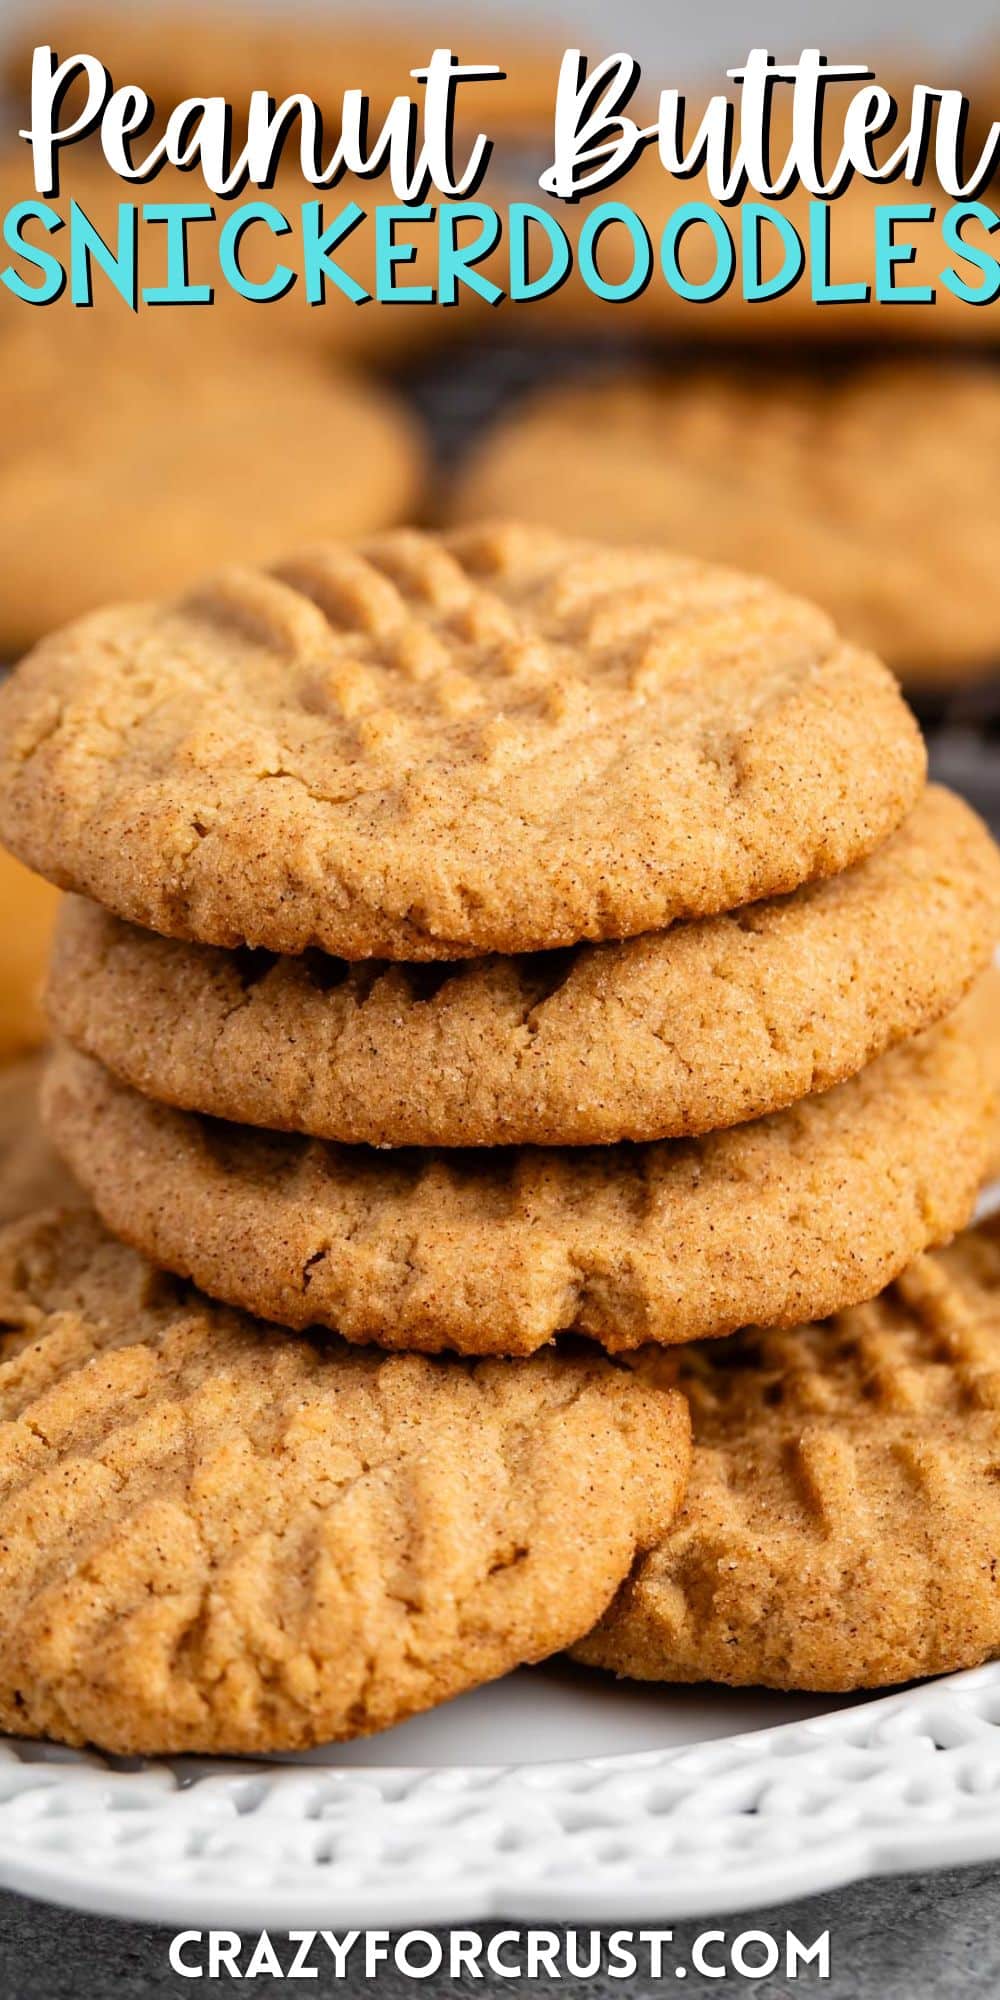 stacked peanut butter snickerdoodles on a white plate next to a spoonful of peanut butter with words on the image.